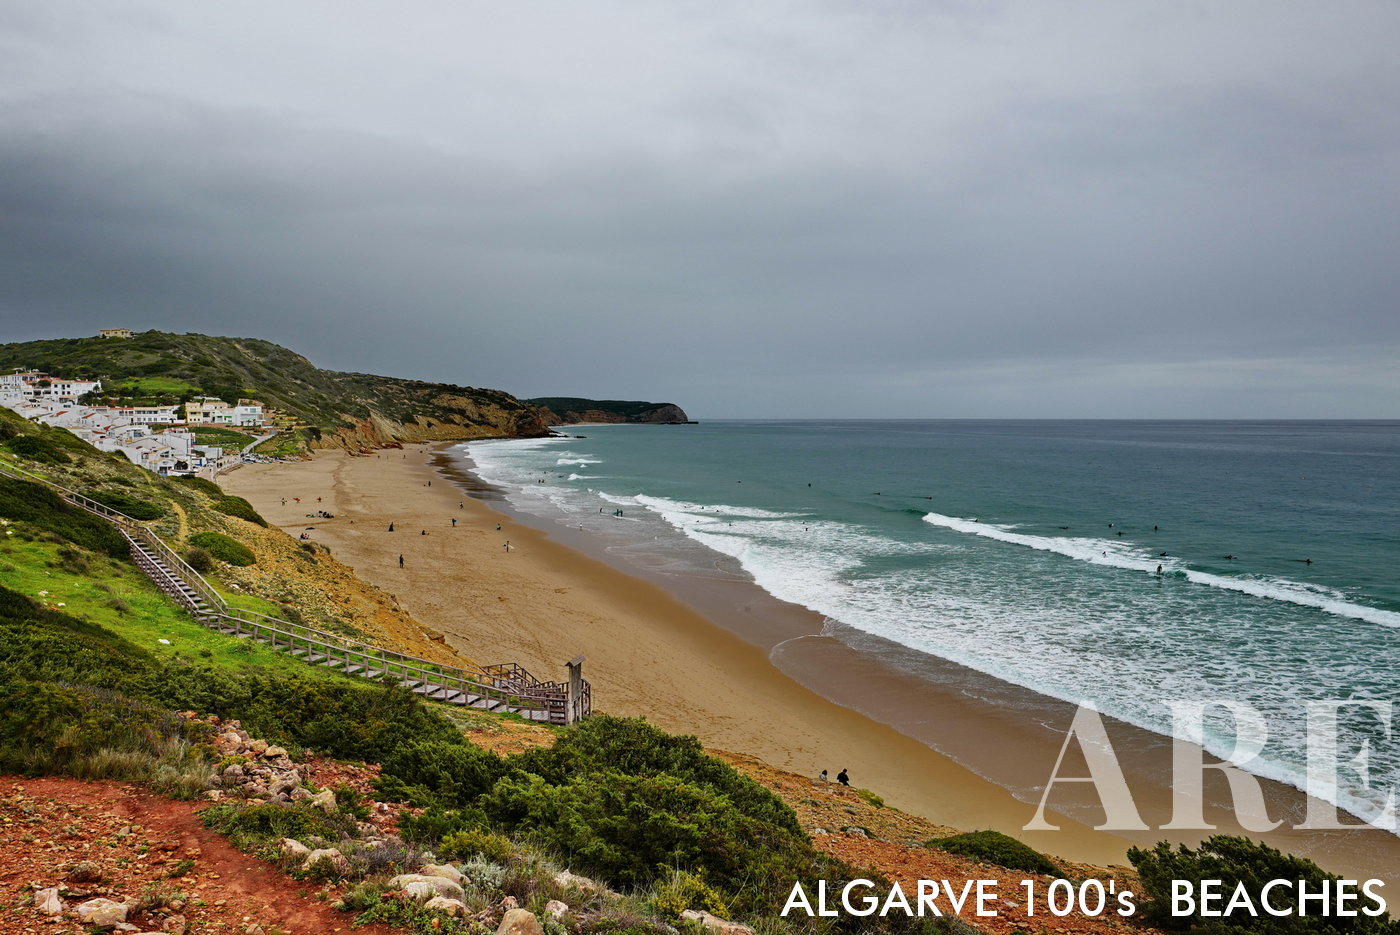 January brings surfers to Salema Beach, nestled in the bay in front of the quaint Salema village. The scene captures the charm of seaside living, perfectly paired with the thrill of riding winter waves.